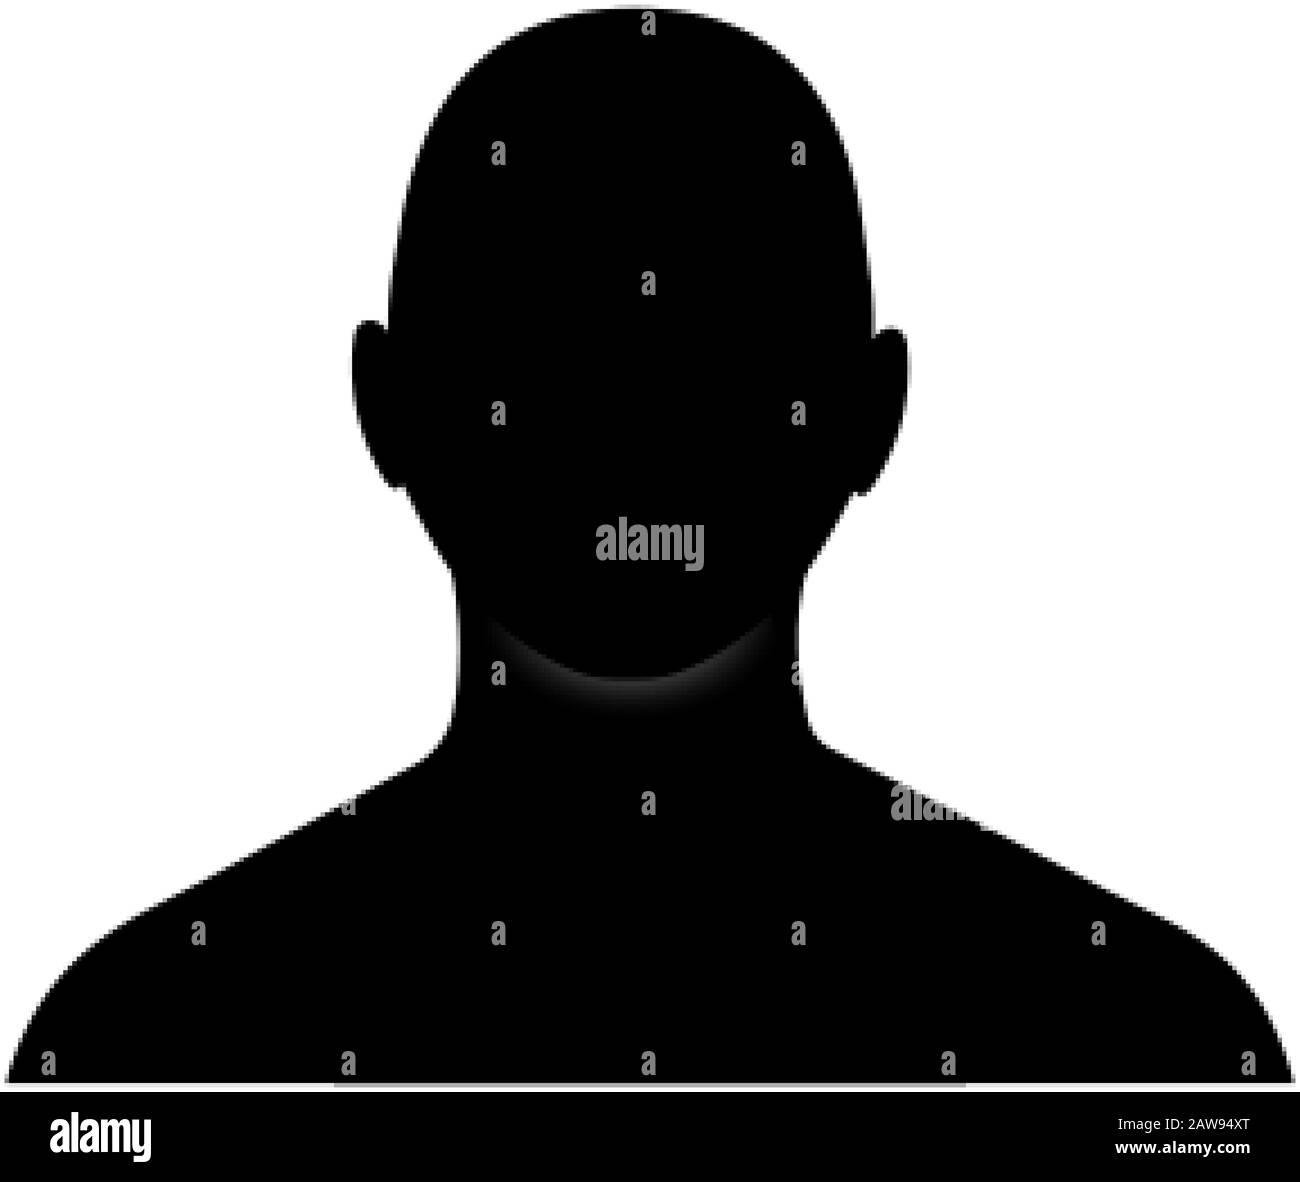 https://c8.alamy.com/comp/2AW94XT/anonymous-male-face-avatar-incognito-man-head-silhouette-2AW94XT.jpg